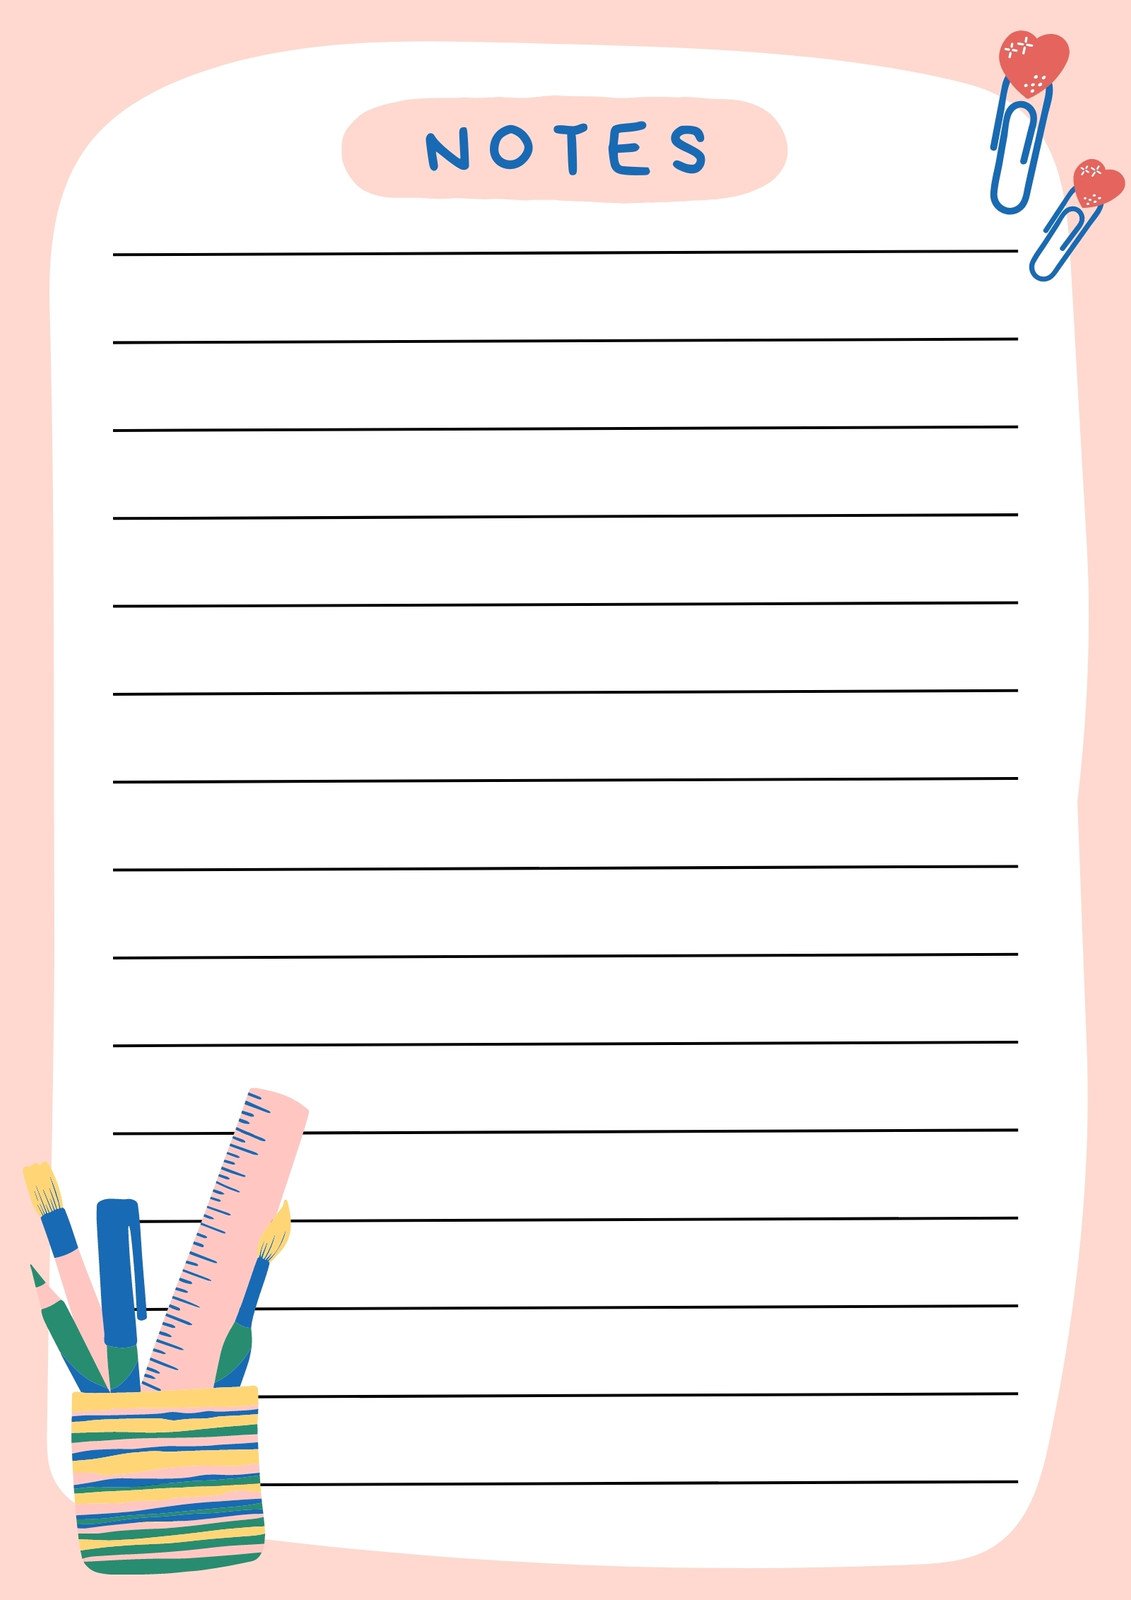 Post-it Note Rectangle PNG - Free Download  Post it notes, Writing paper  printable stationery, Writing paper template